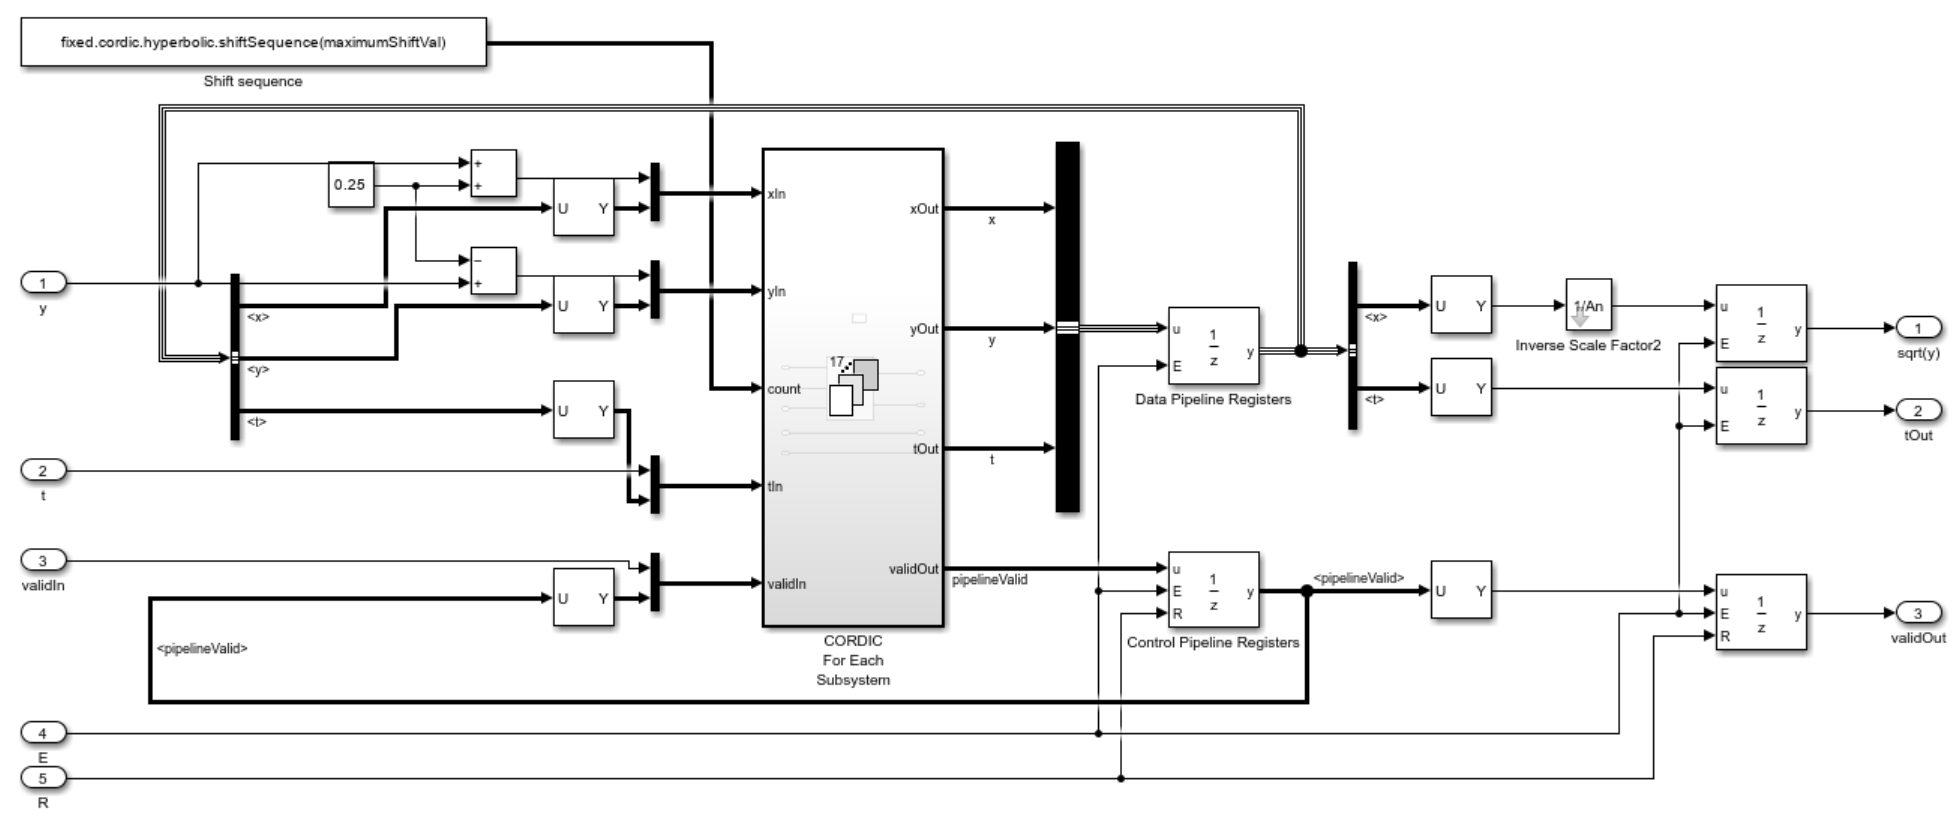 Screenshot of the Simulink model for the CORDIC Square Root Fully-Pipelined block.